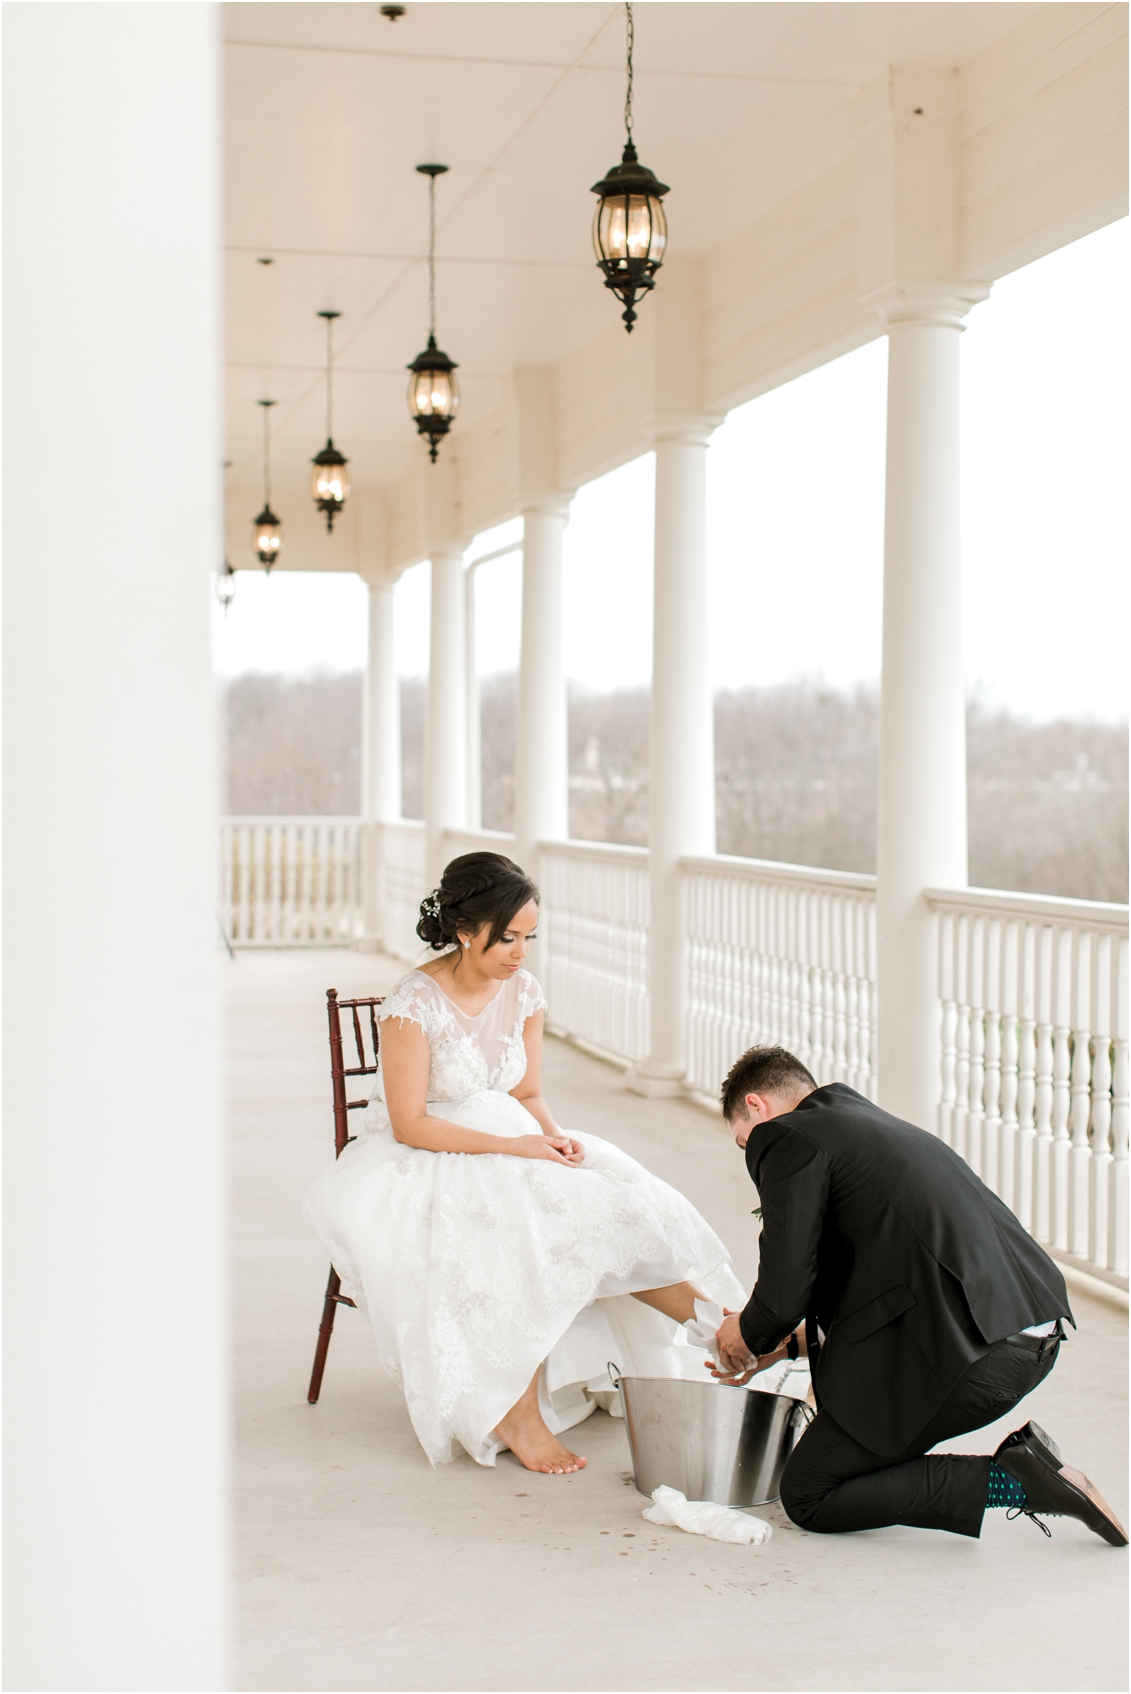 A Wedding at the Milestone in Denton, Texas by Gaby Caskey Photography, foot washing ceremony